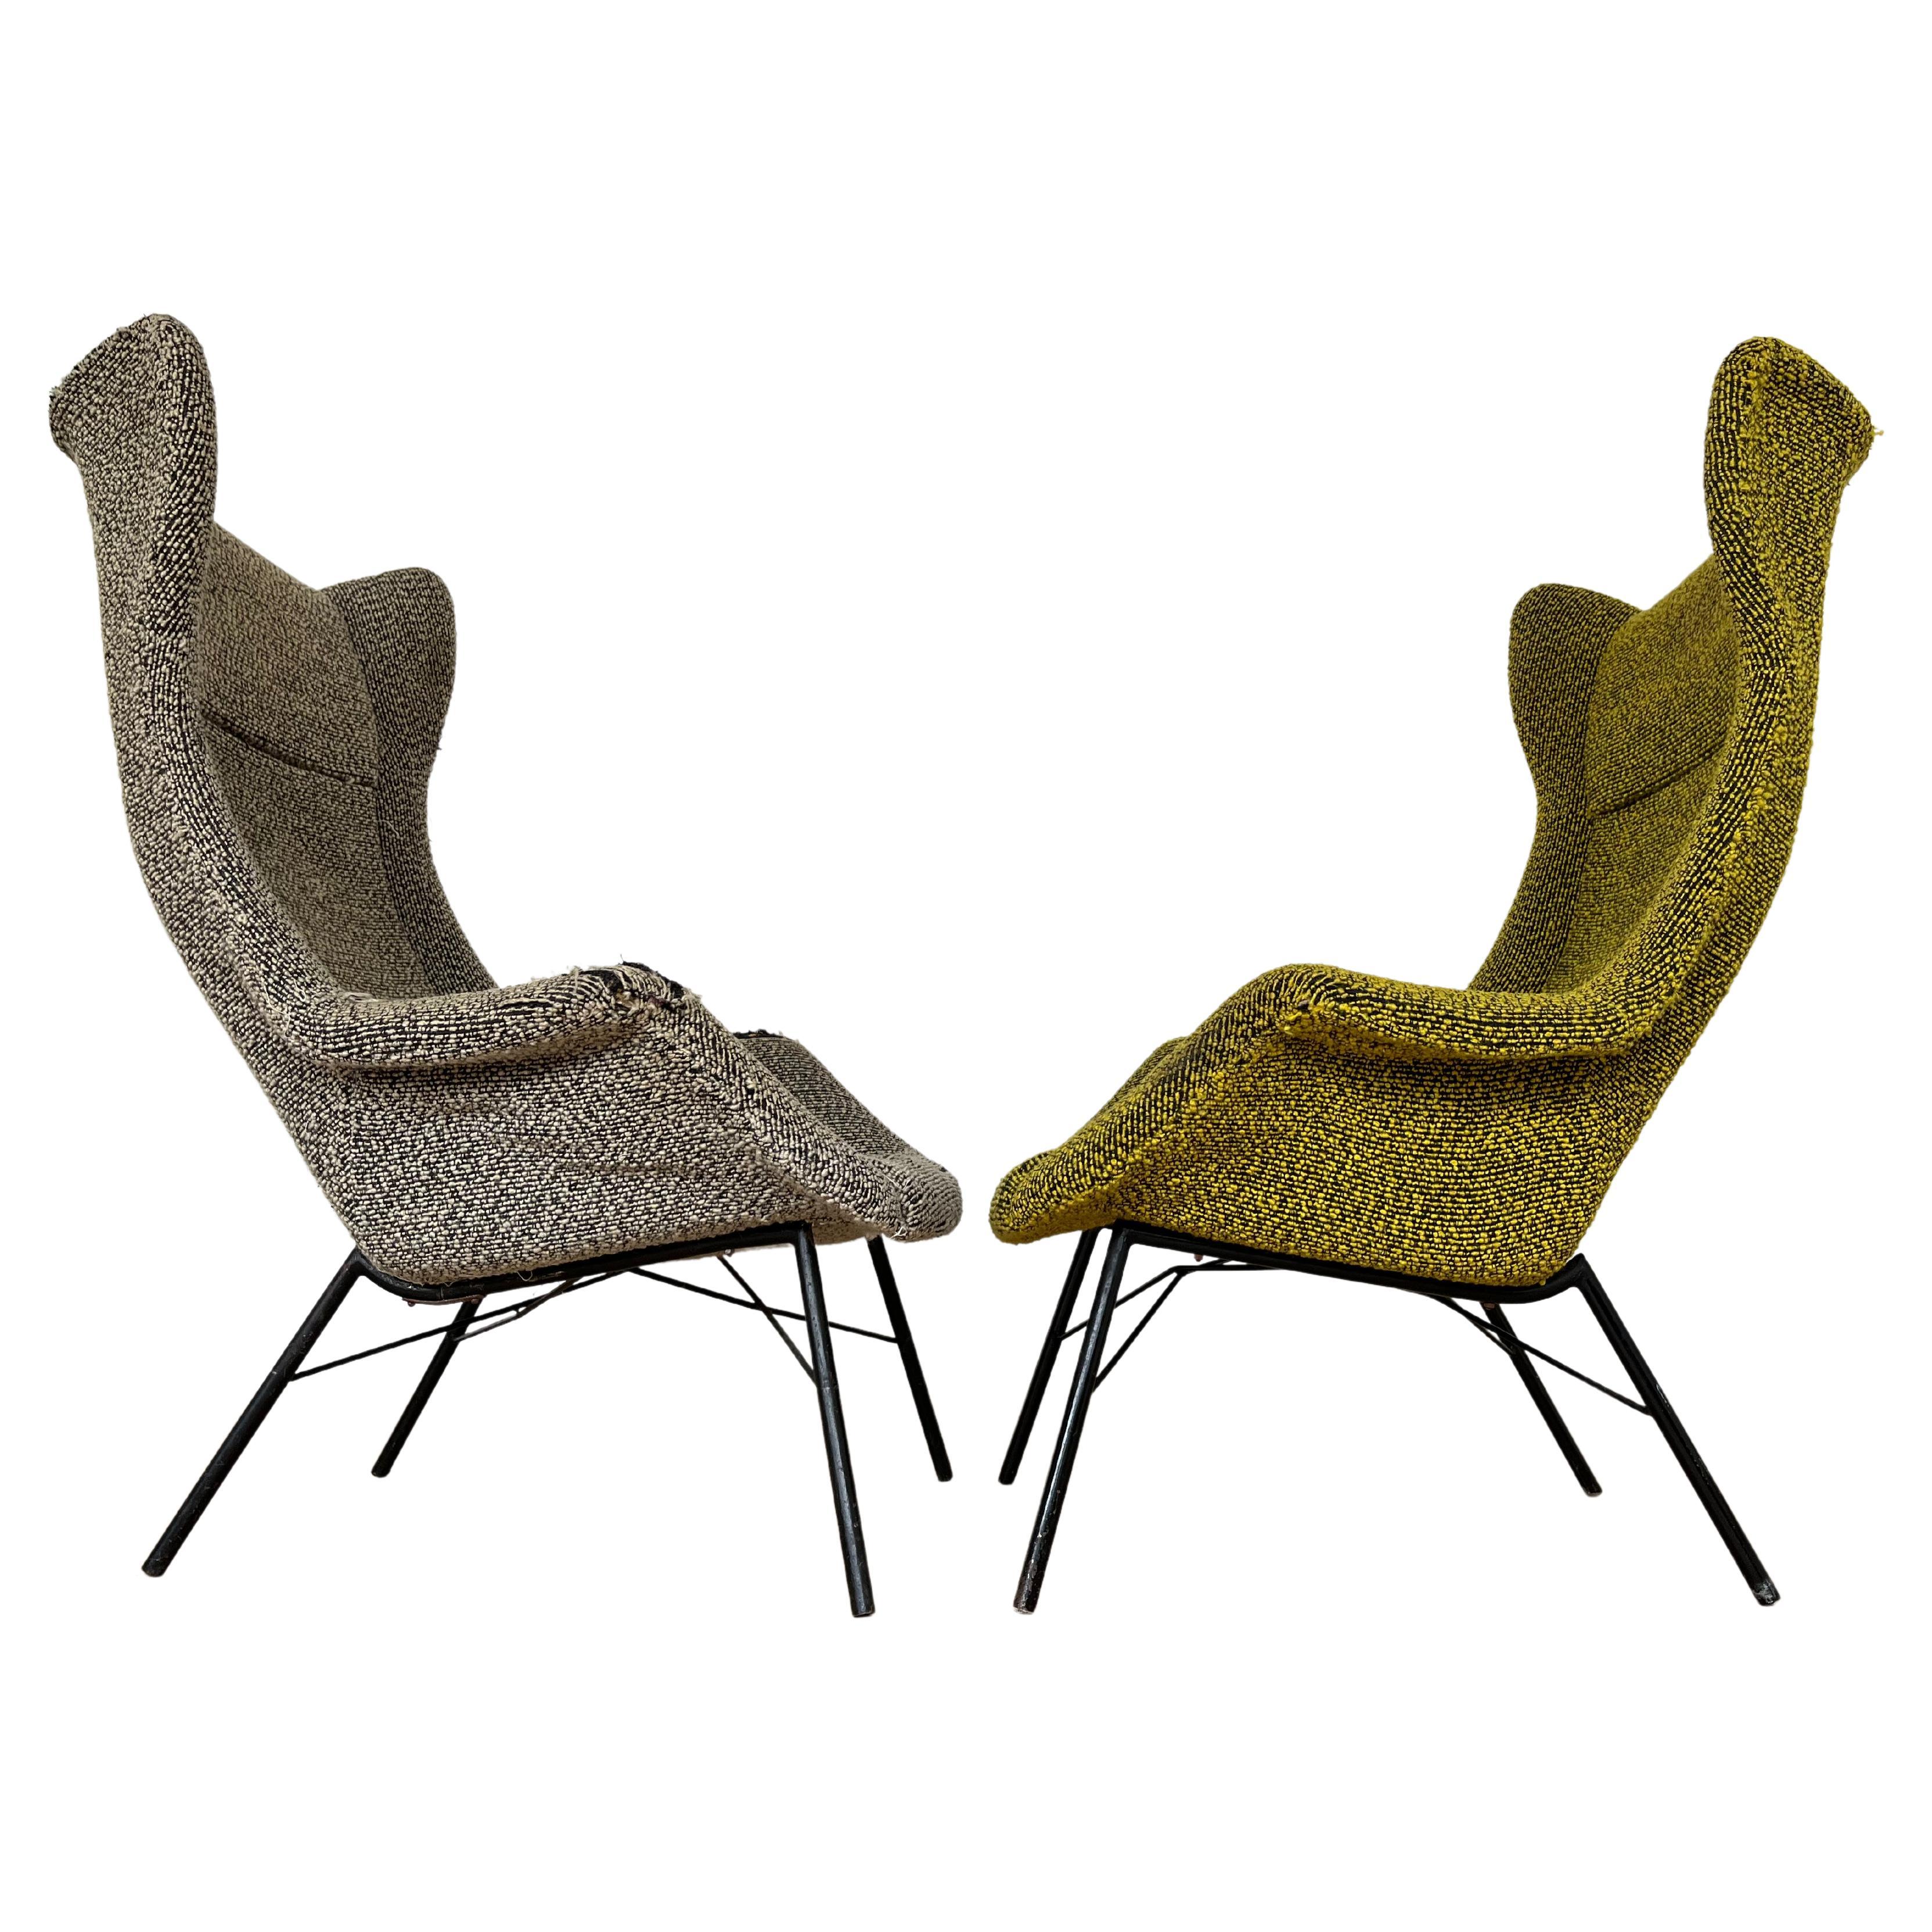 Pair of Design Fibreglass Wing Chairs by Miroslav Navratil, 1970s For Sale